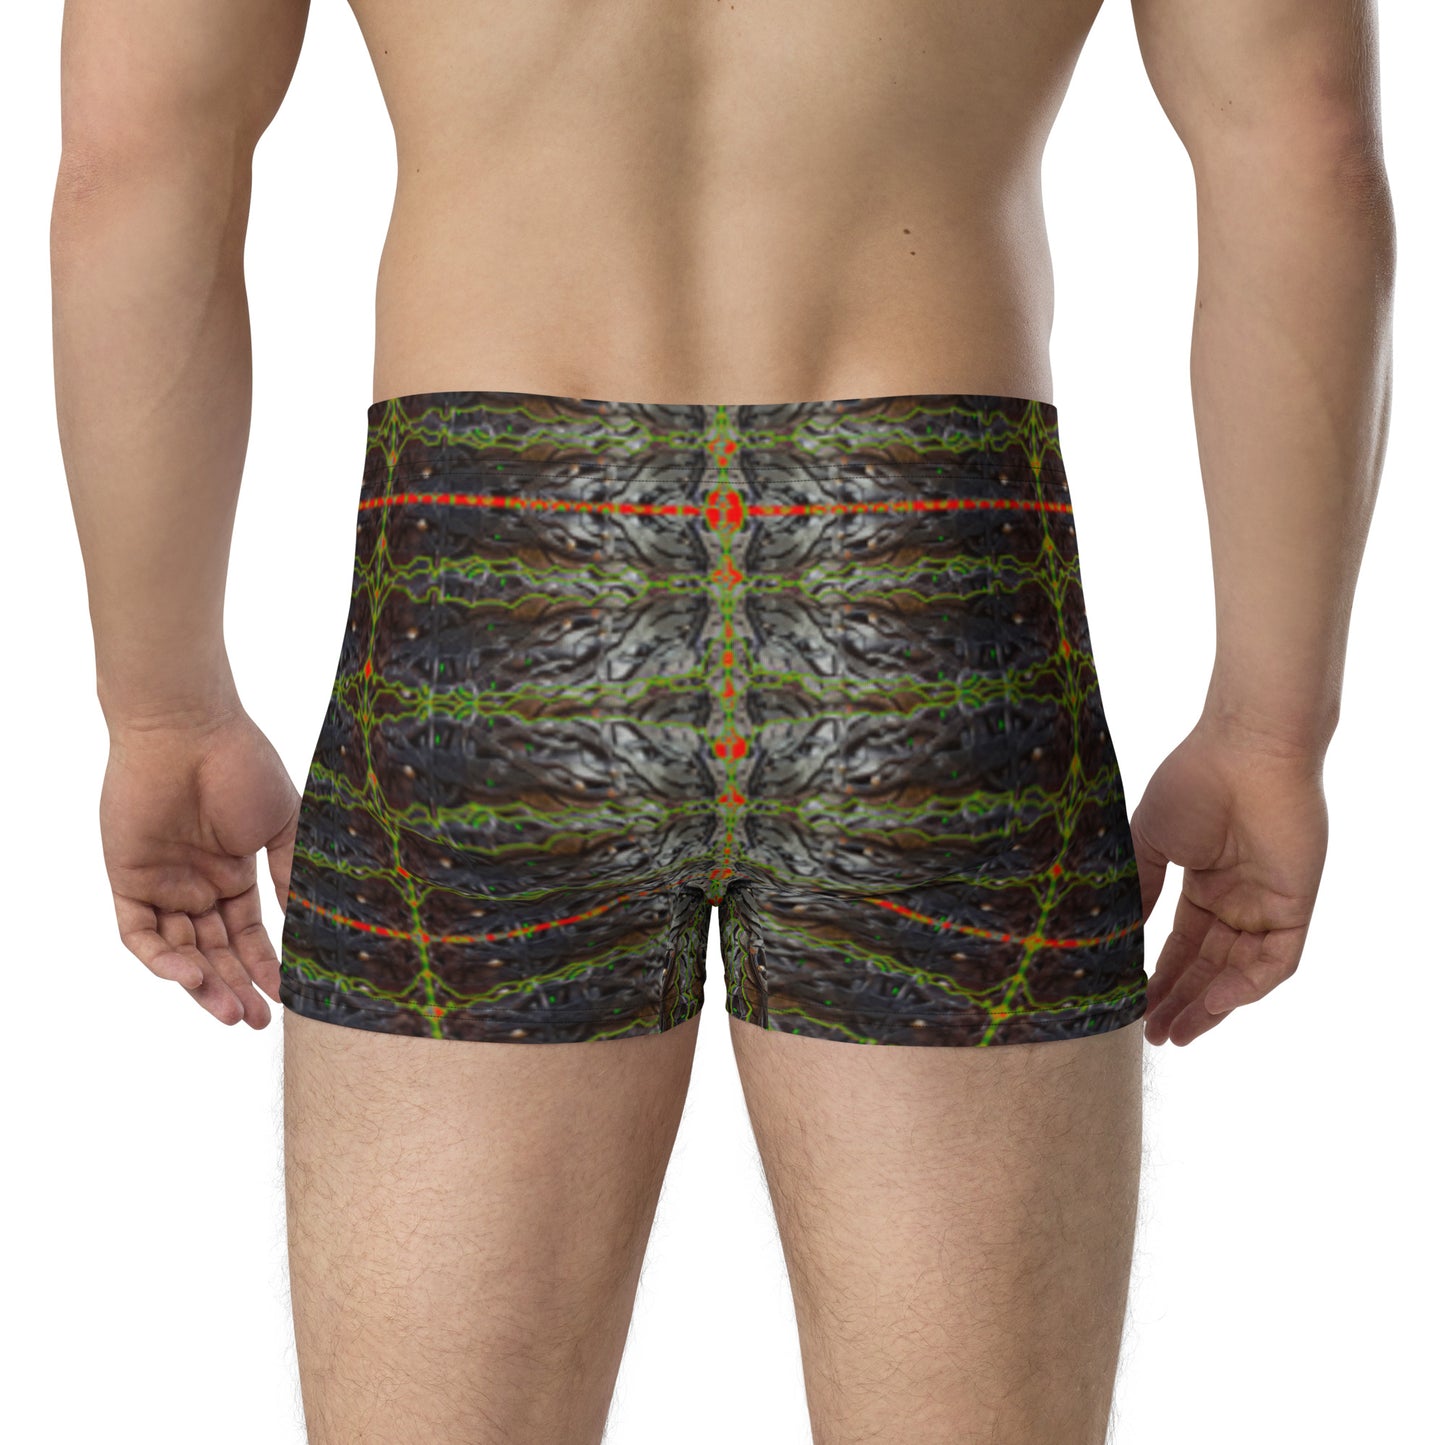 Boxer Briefs (His/They)(Rind#1 Tree Link) RJSTH@Fabric#1 RJSTHW2021 RJS